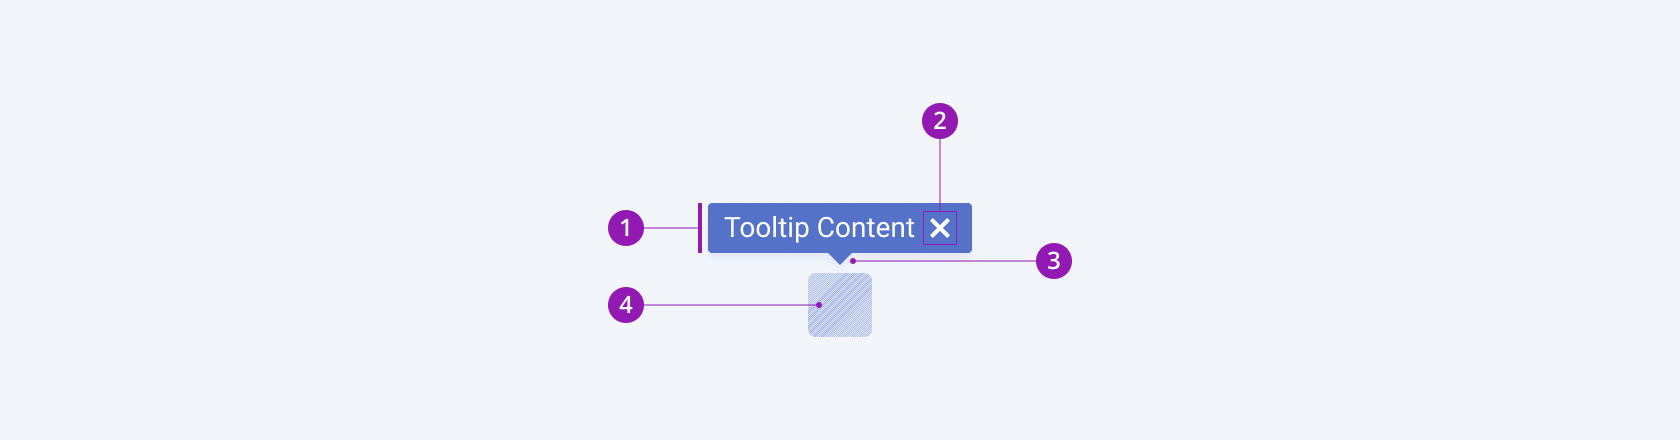 A Telerik and Kendo UI Tooltip component showing the content area, remove icon, callout, and anchor element